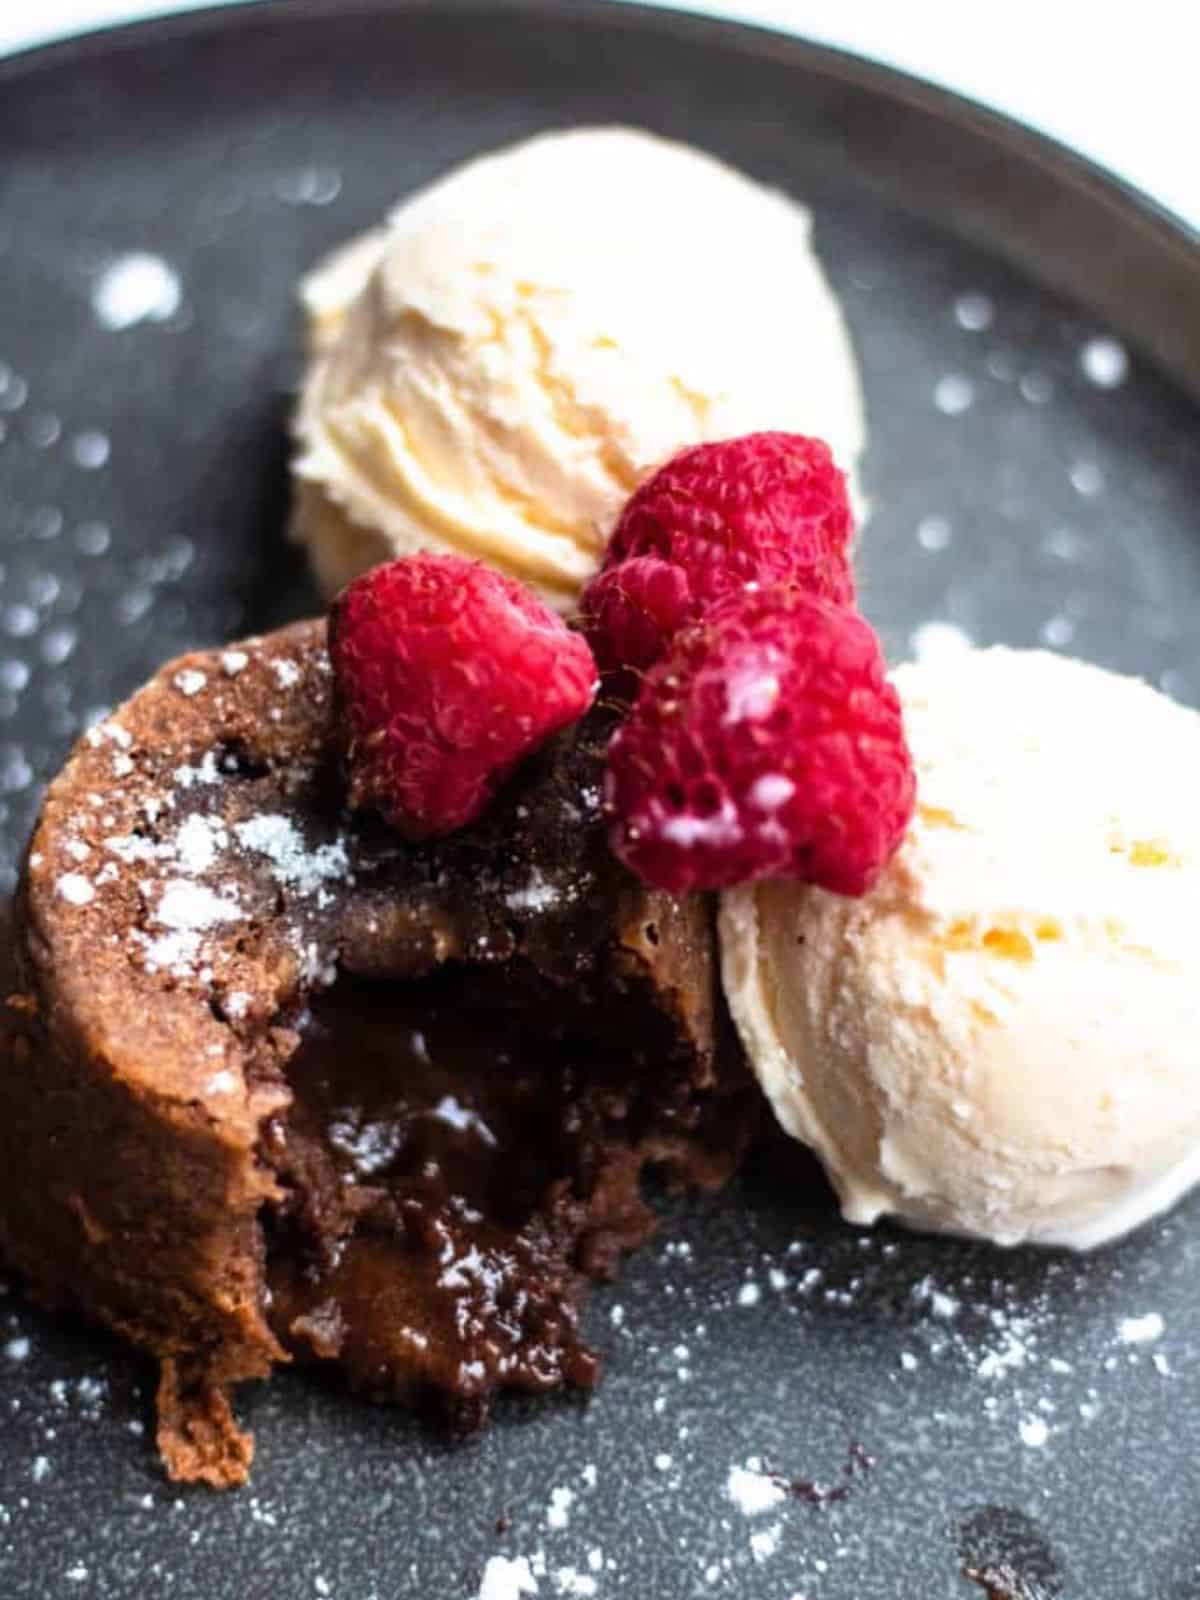 Lava cake with molten chocolate oozing out, double scoop vanilla ice cream and raspberries.